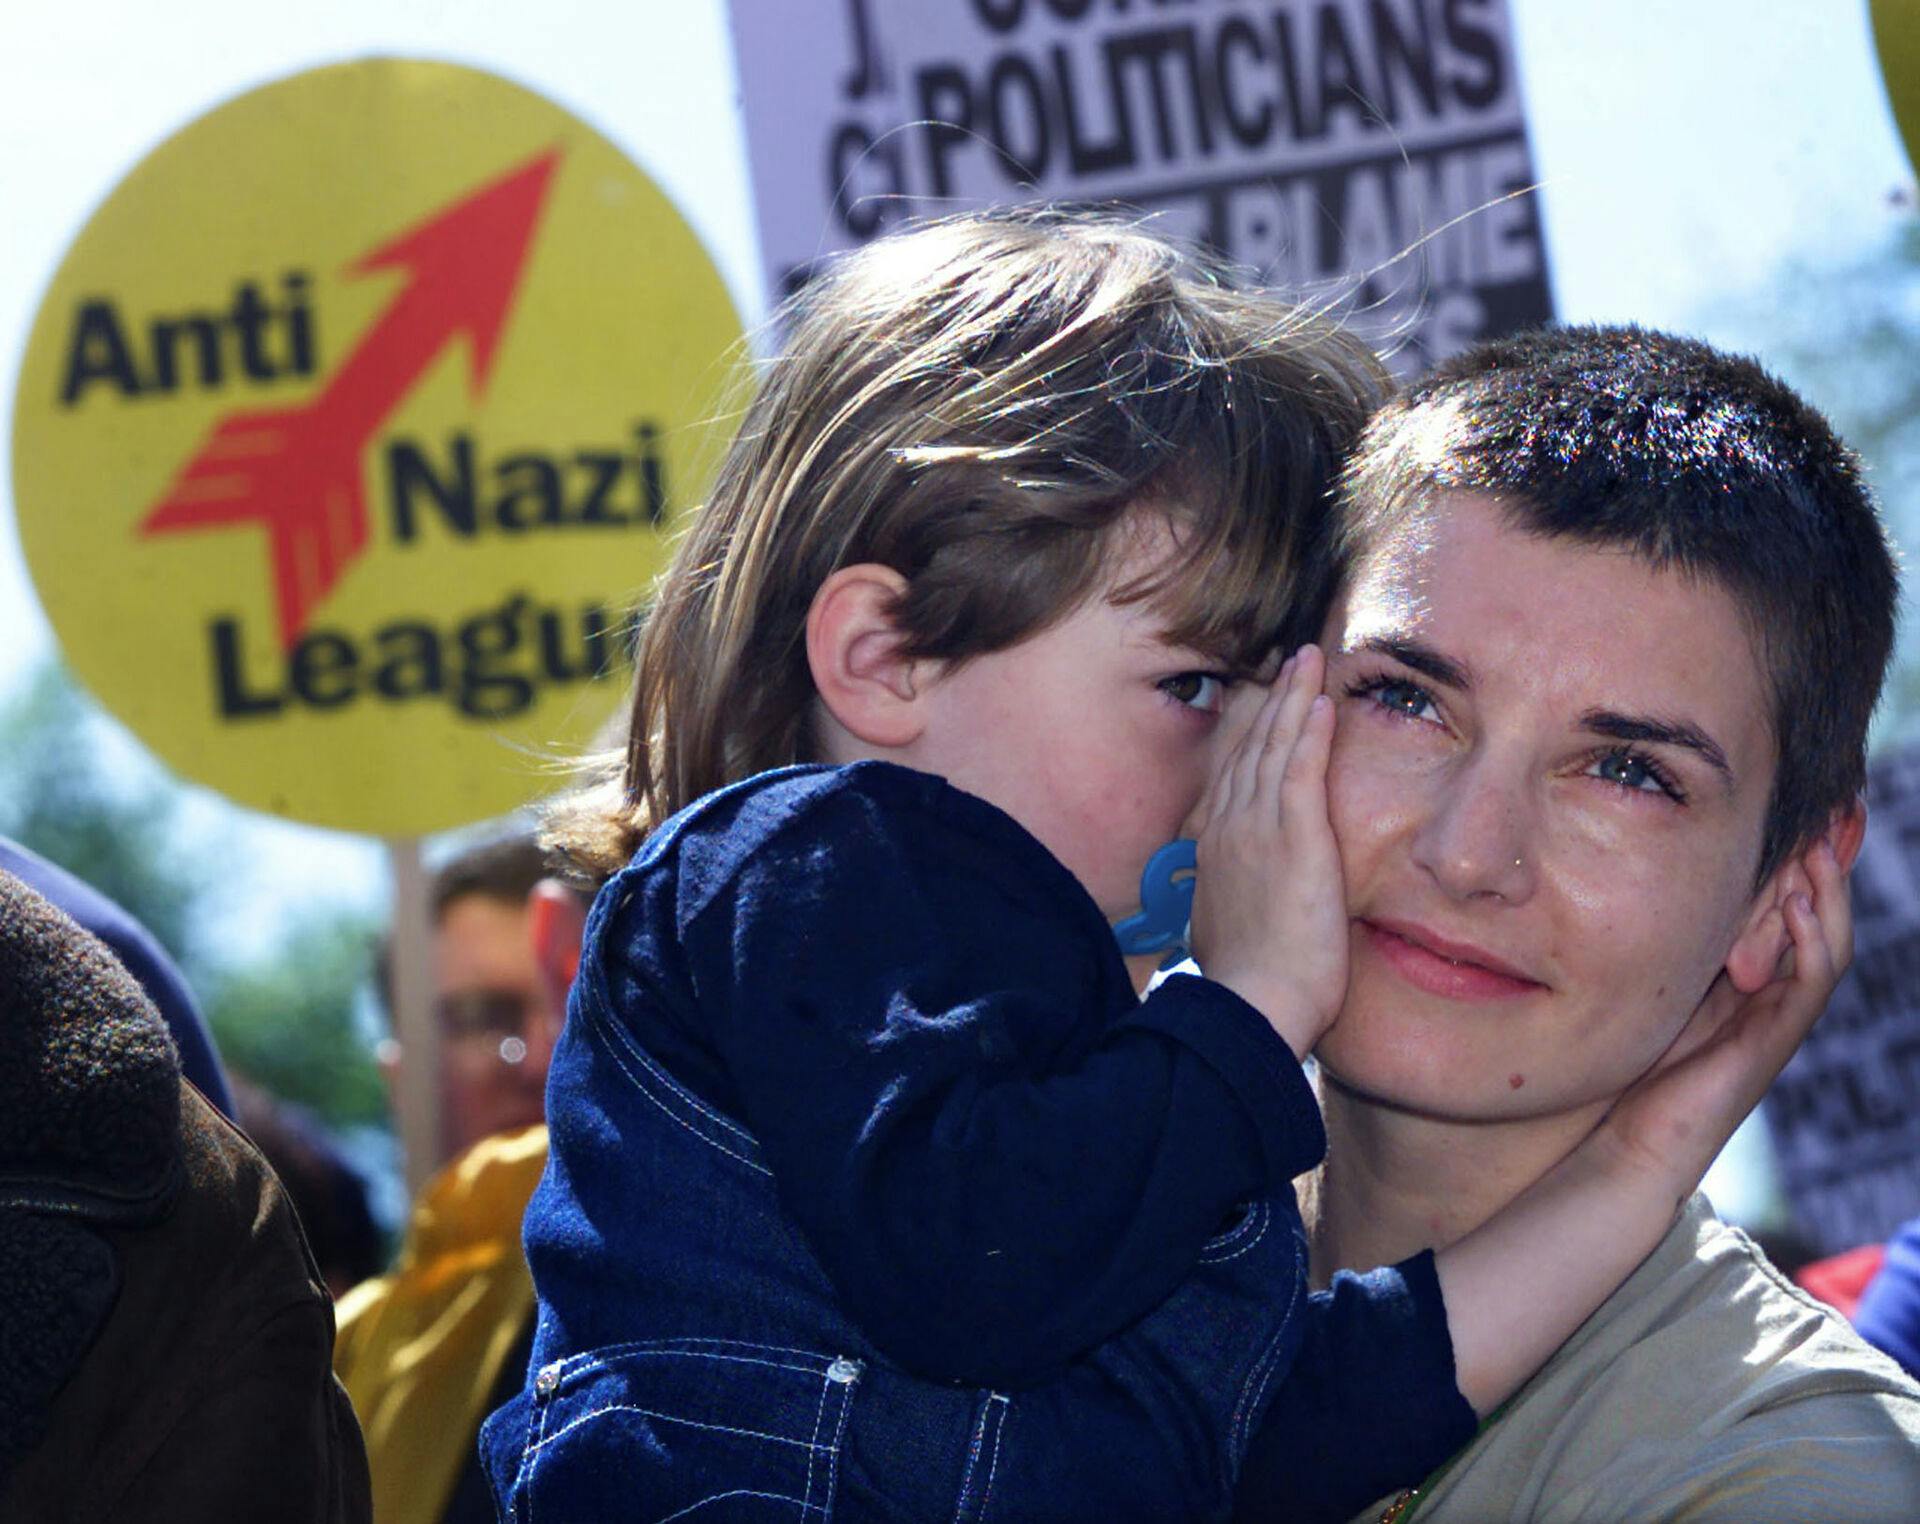 Irish singer Sinead O'Connor (R) hugs her daughter Roisin during an Anti-Racism demonstration in Dublin city centre, May 13. Thousands of Irish people gathered to protest against recent racist attacks and increasing racial tension in Ireland.